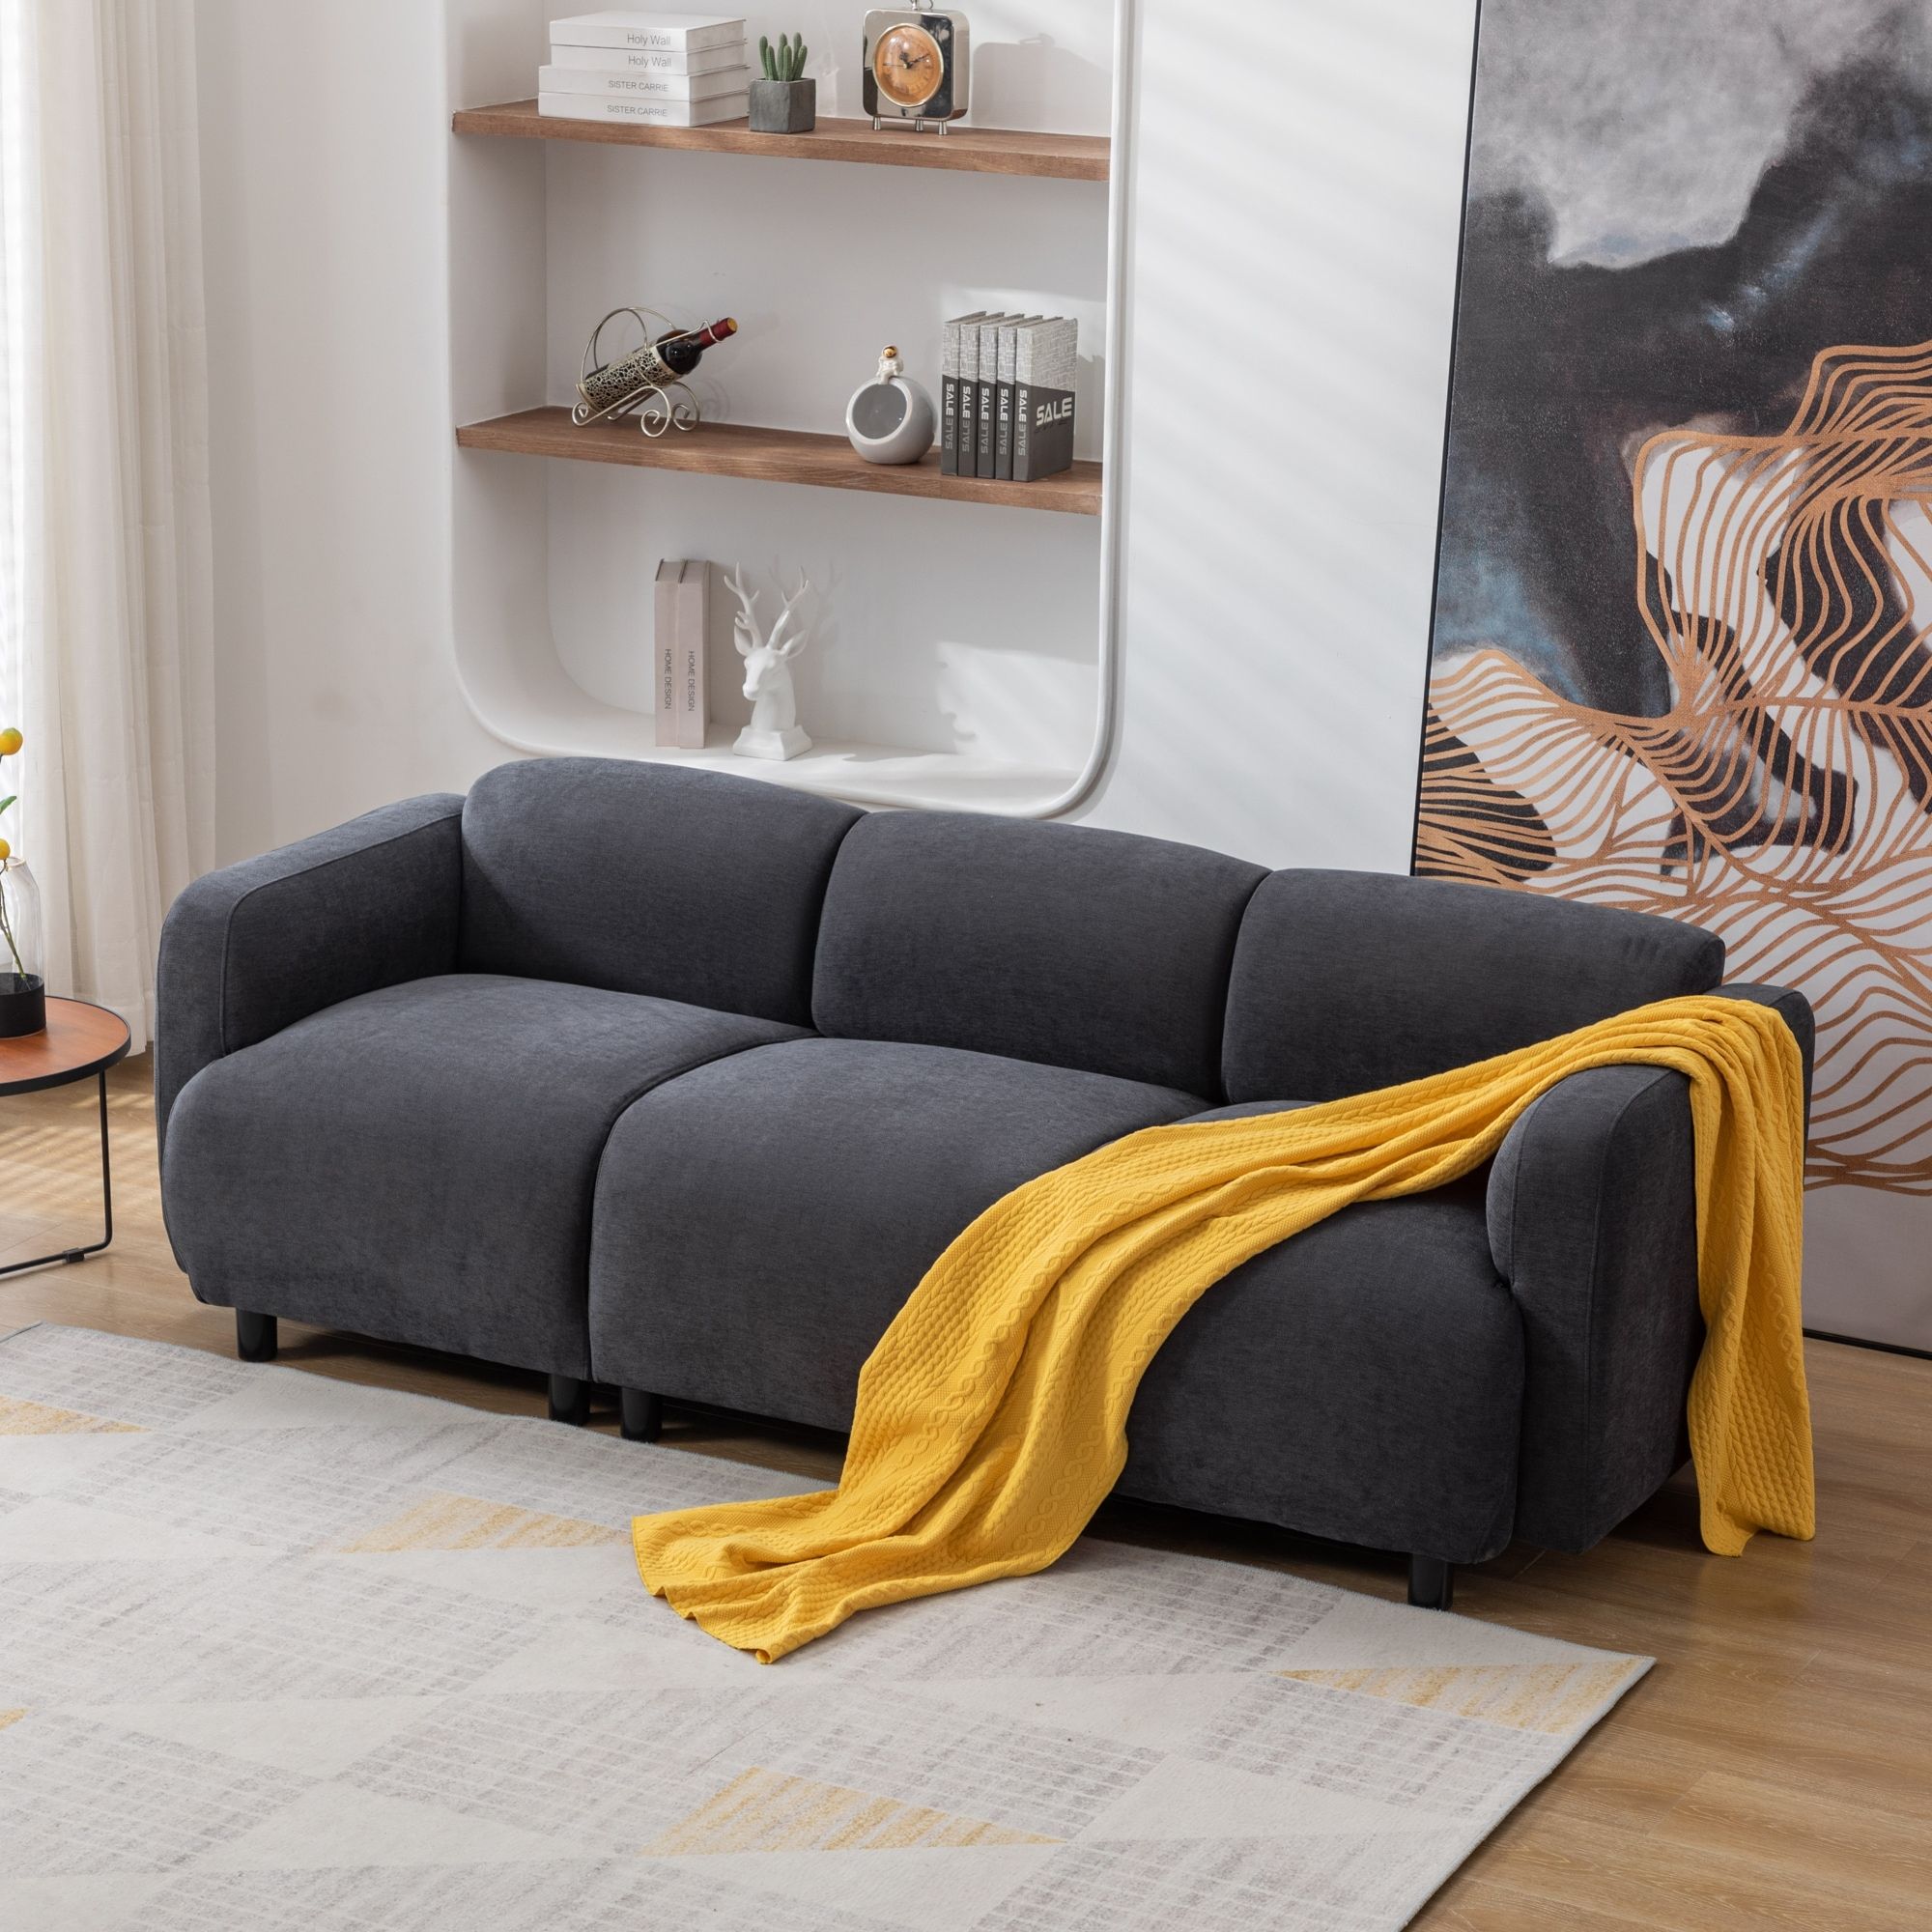 Livingroom 3 Seat Deep Cloud Sofa Sectional Couch Modern Polyester Fabric  Sofa With 12 Support Legs For Living Room, Dark Grey – On Sale – Bed Bath &  Beyond – 37980562 Regarding Dark Grey Polyester Sofa Couches (View 4 of 15)